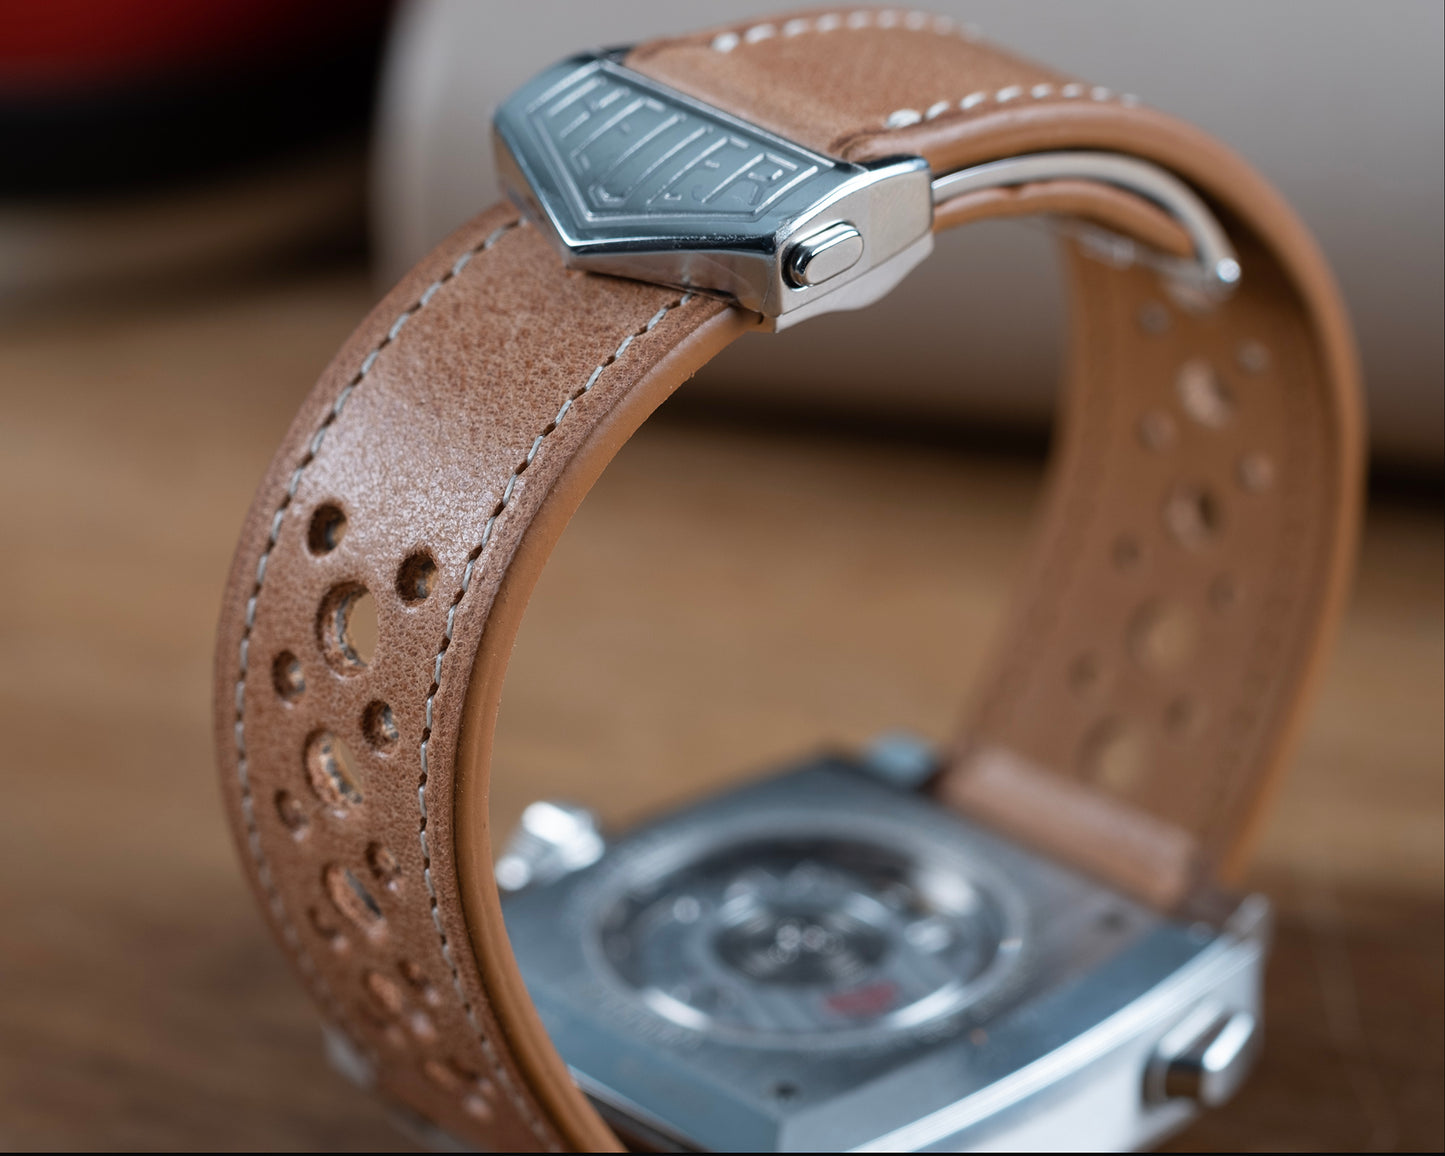 Watch Strap compatible buckle tag heuer tuscany camel - Atelier romane